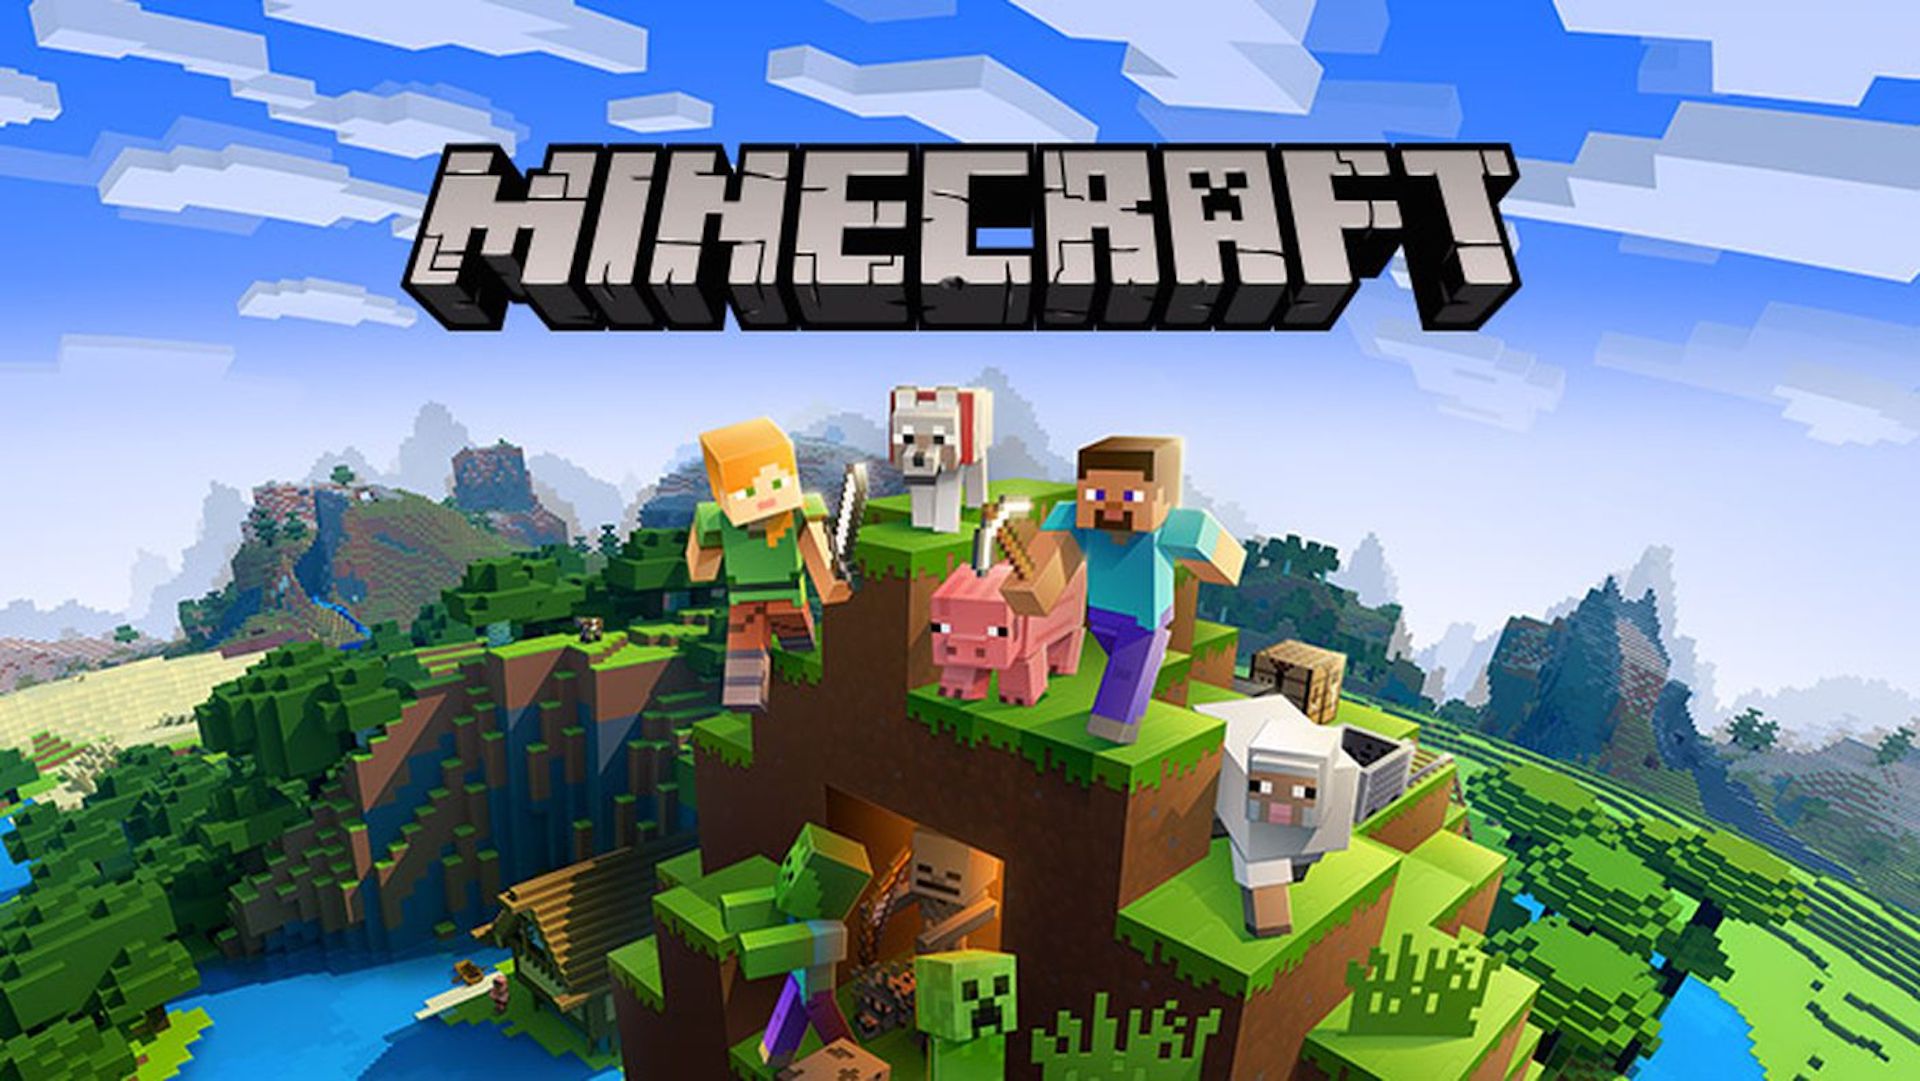 Minecraft Gets ESRB Rating for Xbox Series X/S Release